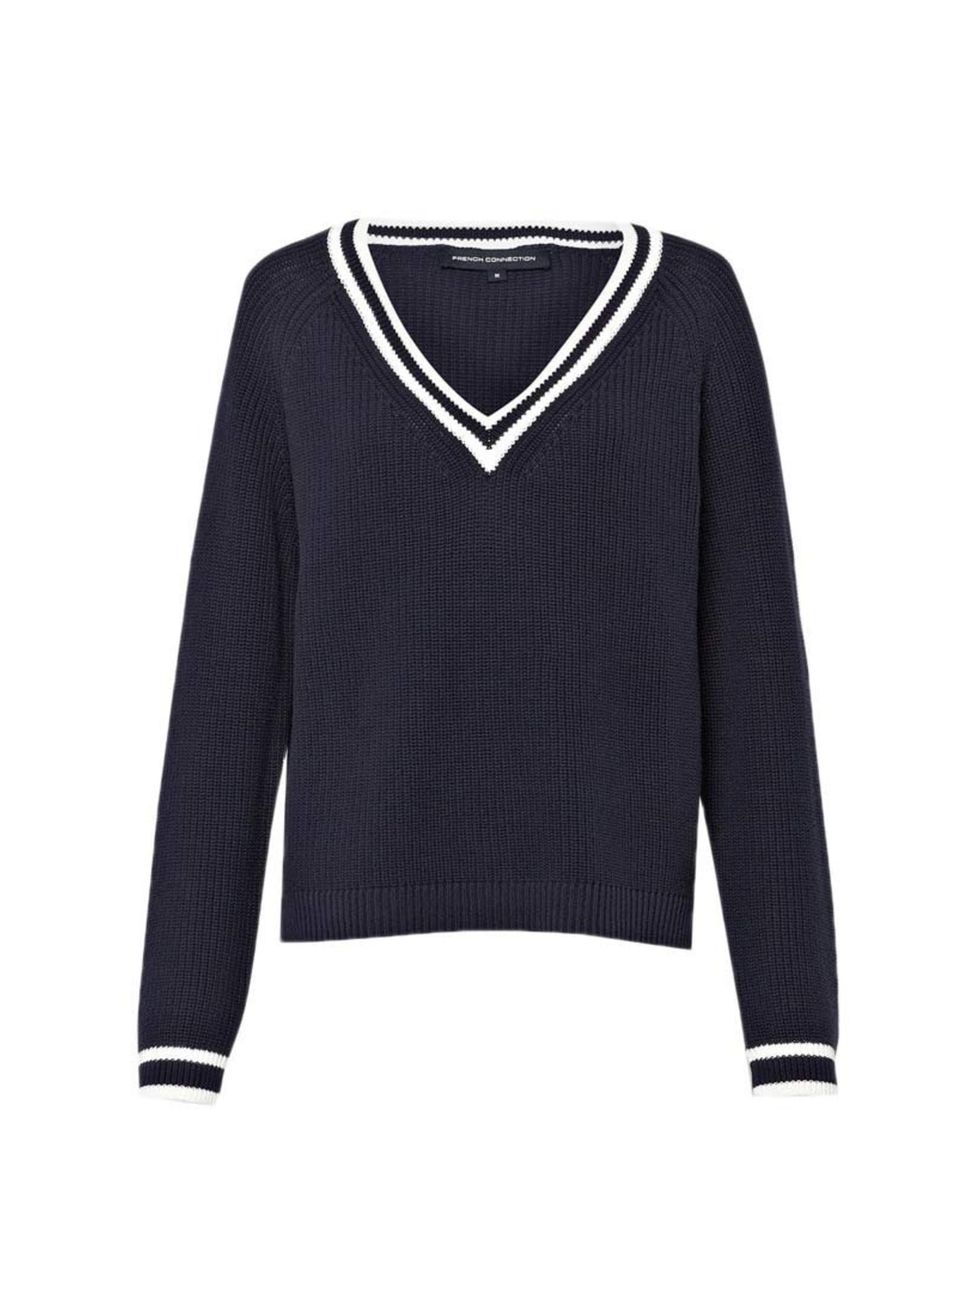 <p>We were going to write a play on words here using some cricket terminology; but who are we kidding, we don't watch cricket. Still, we love Beauty Assistant Joely Walker's new knit.</p><p><a href="http://www.frenchconnection.com/product/Woman+Collection